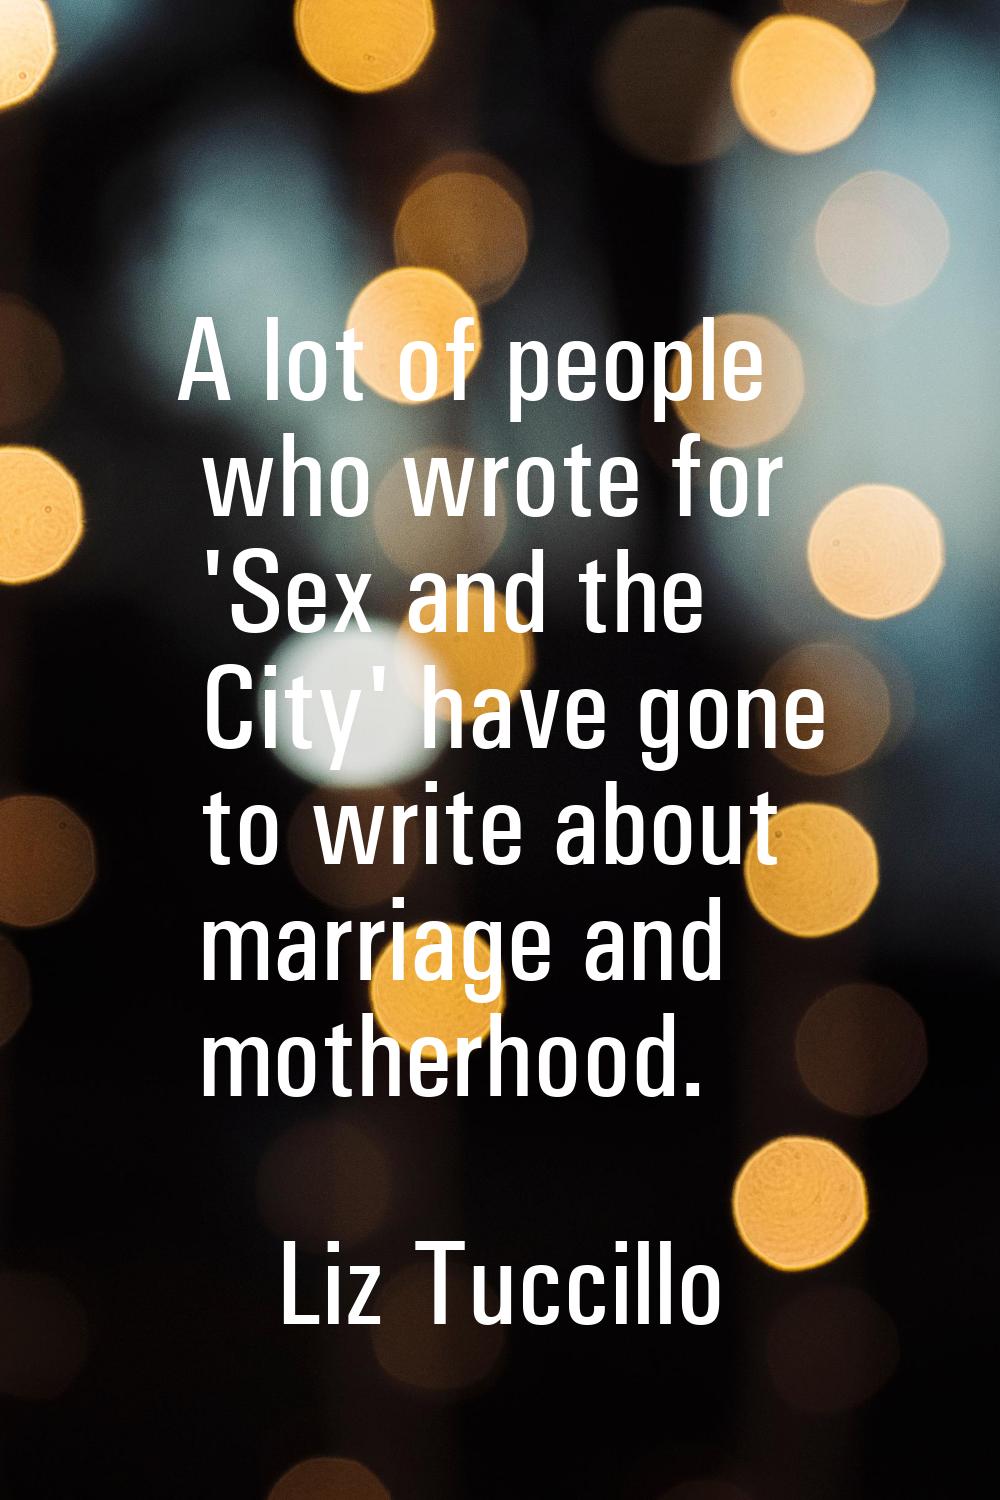 A lot of people who wrote for 'Sex and the City' have gone to write about marriage and motherhood.